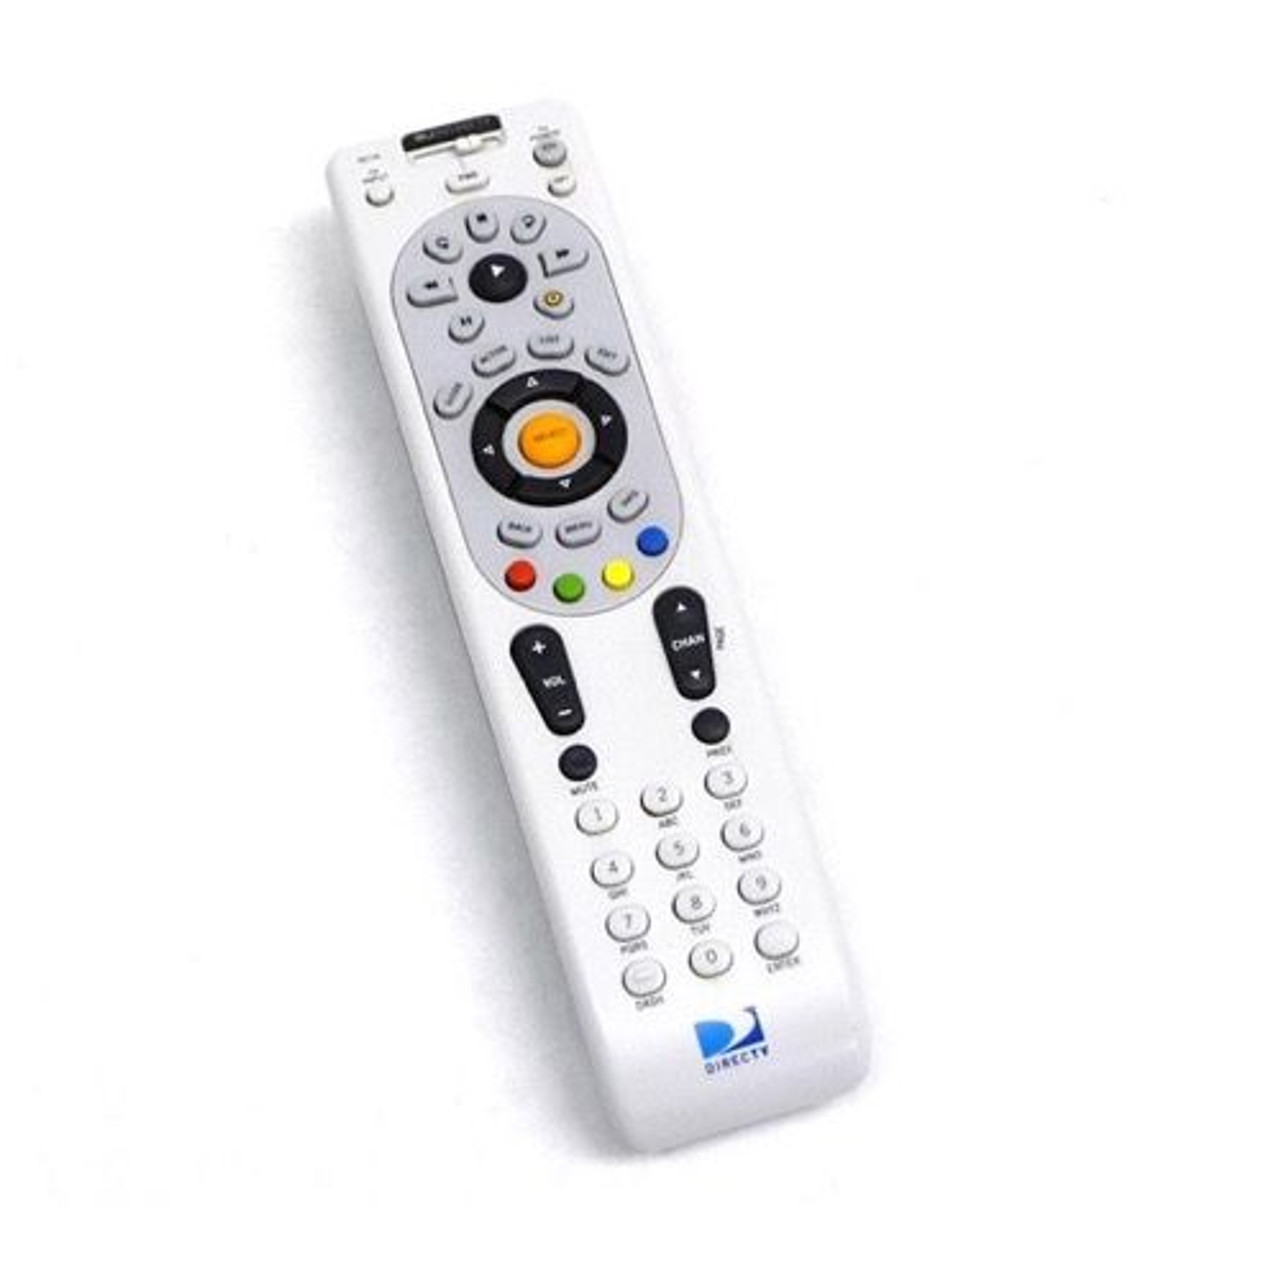 DirecTV RC65X 4 Way Universal IR and RF Remote Control for H/HR24 and Receiver Above 2 Way Technology Programming